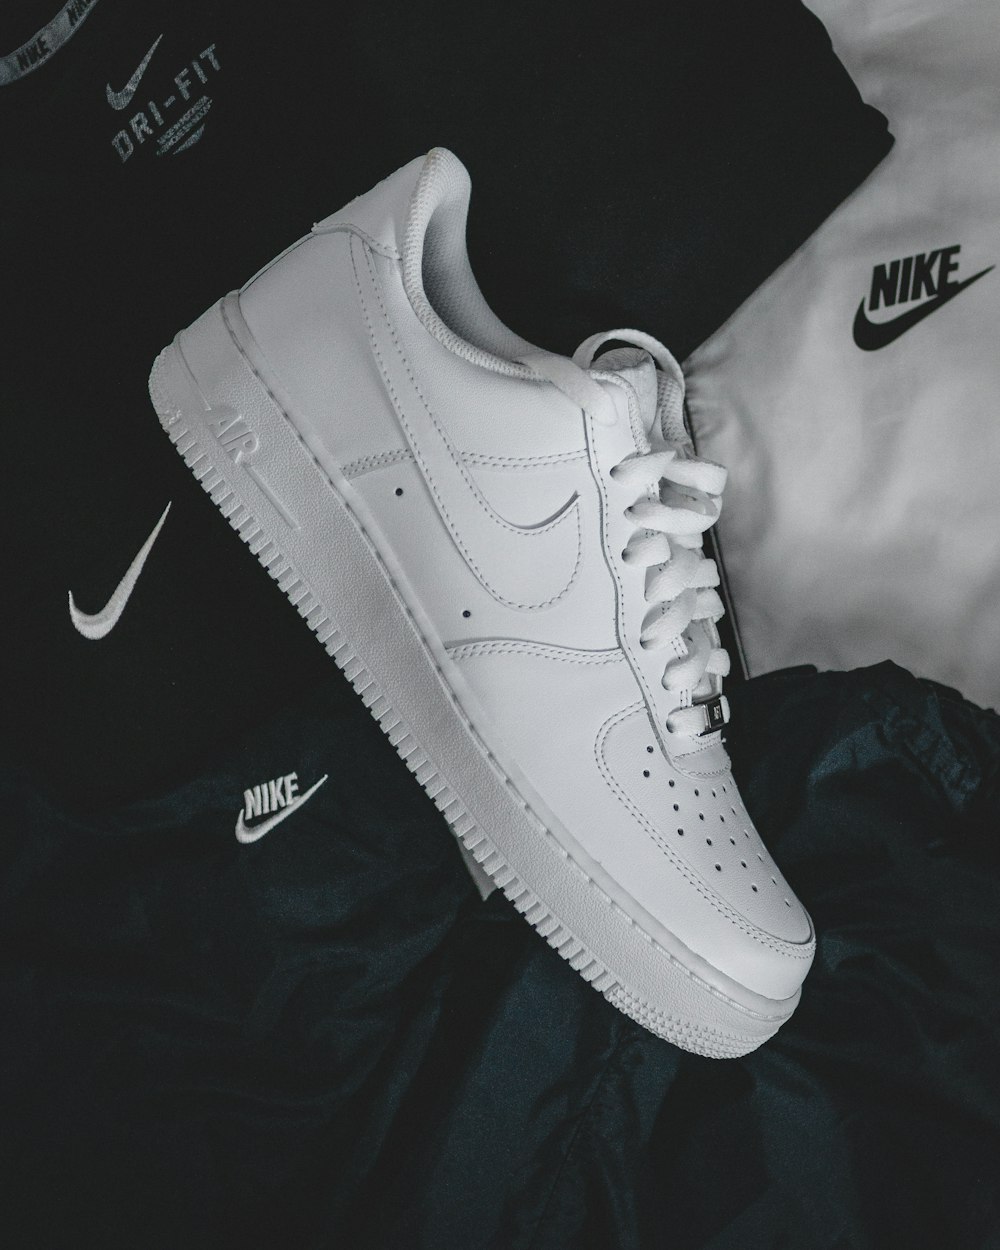 White Sneakers Pictures | Download Free Images on Unsplash